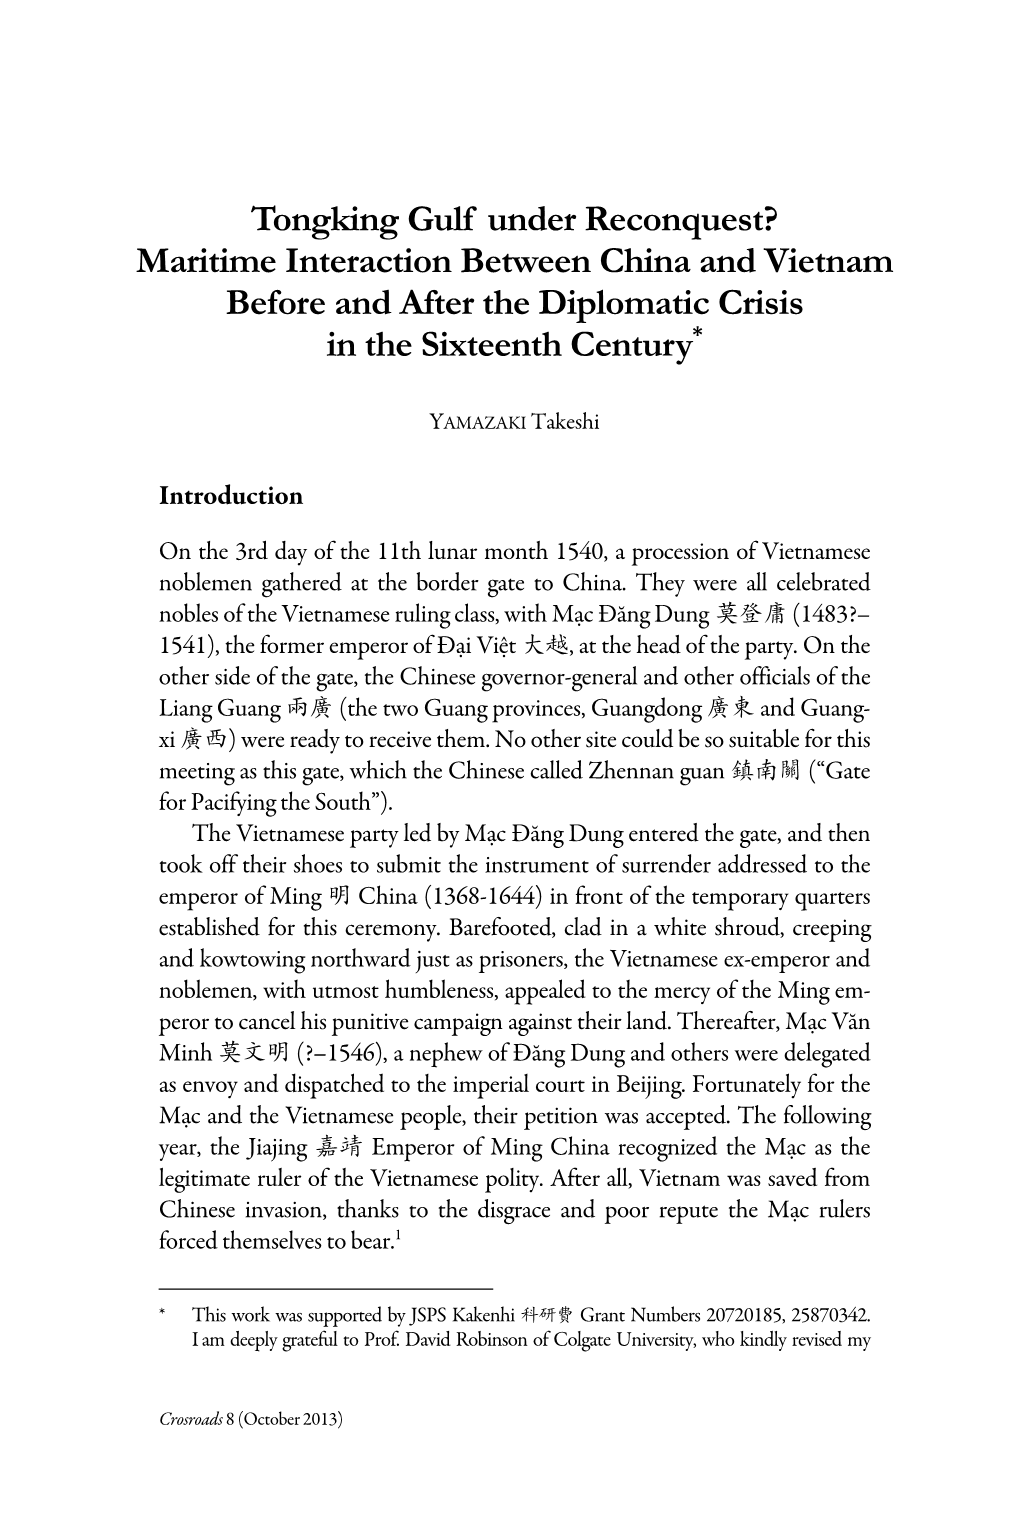 Maritime Interaction Between China and Vietnam Before and After the Diplomatic Crisis in the Sixteenth Century*